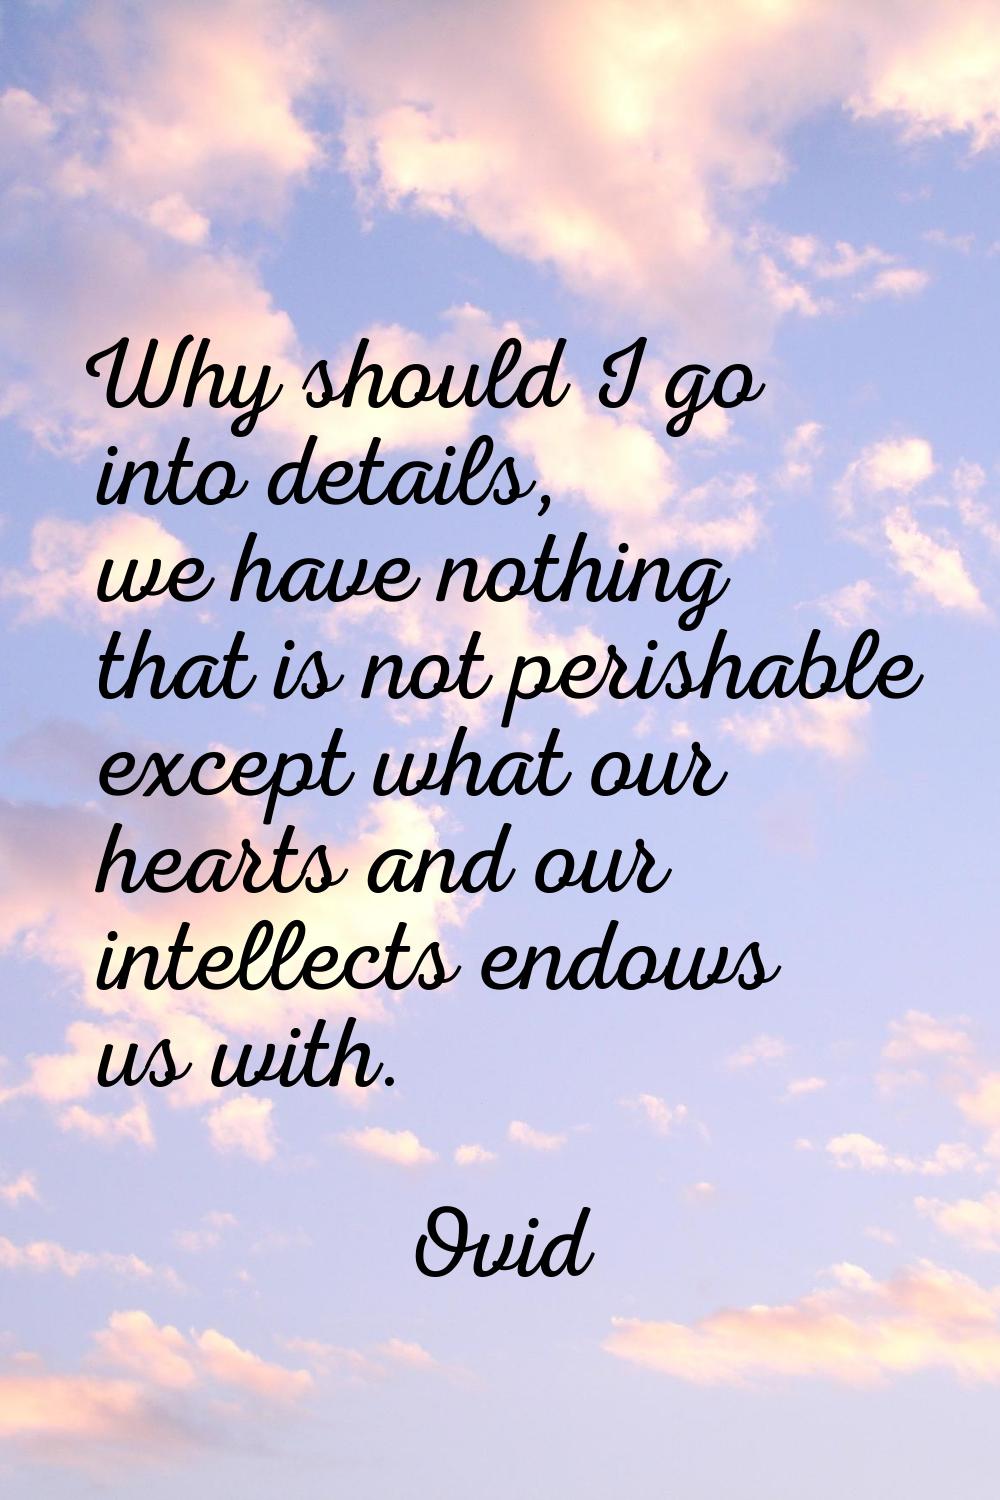 Why should I go into details, we have nothing that is not perishable except what our hearts and our